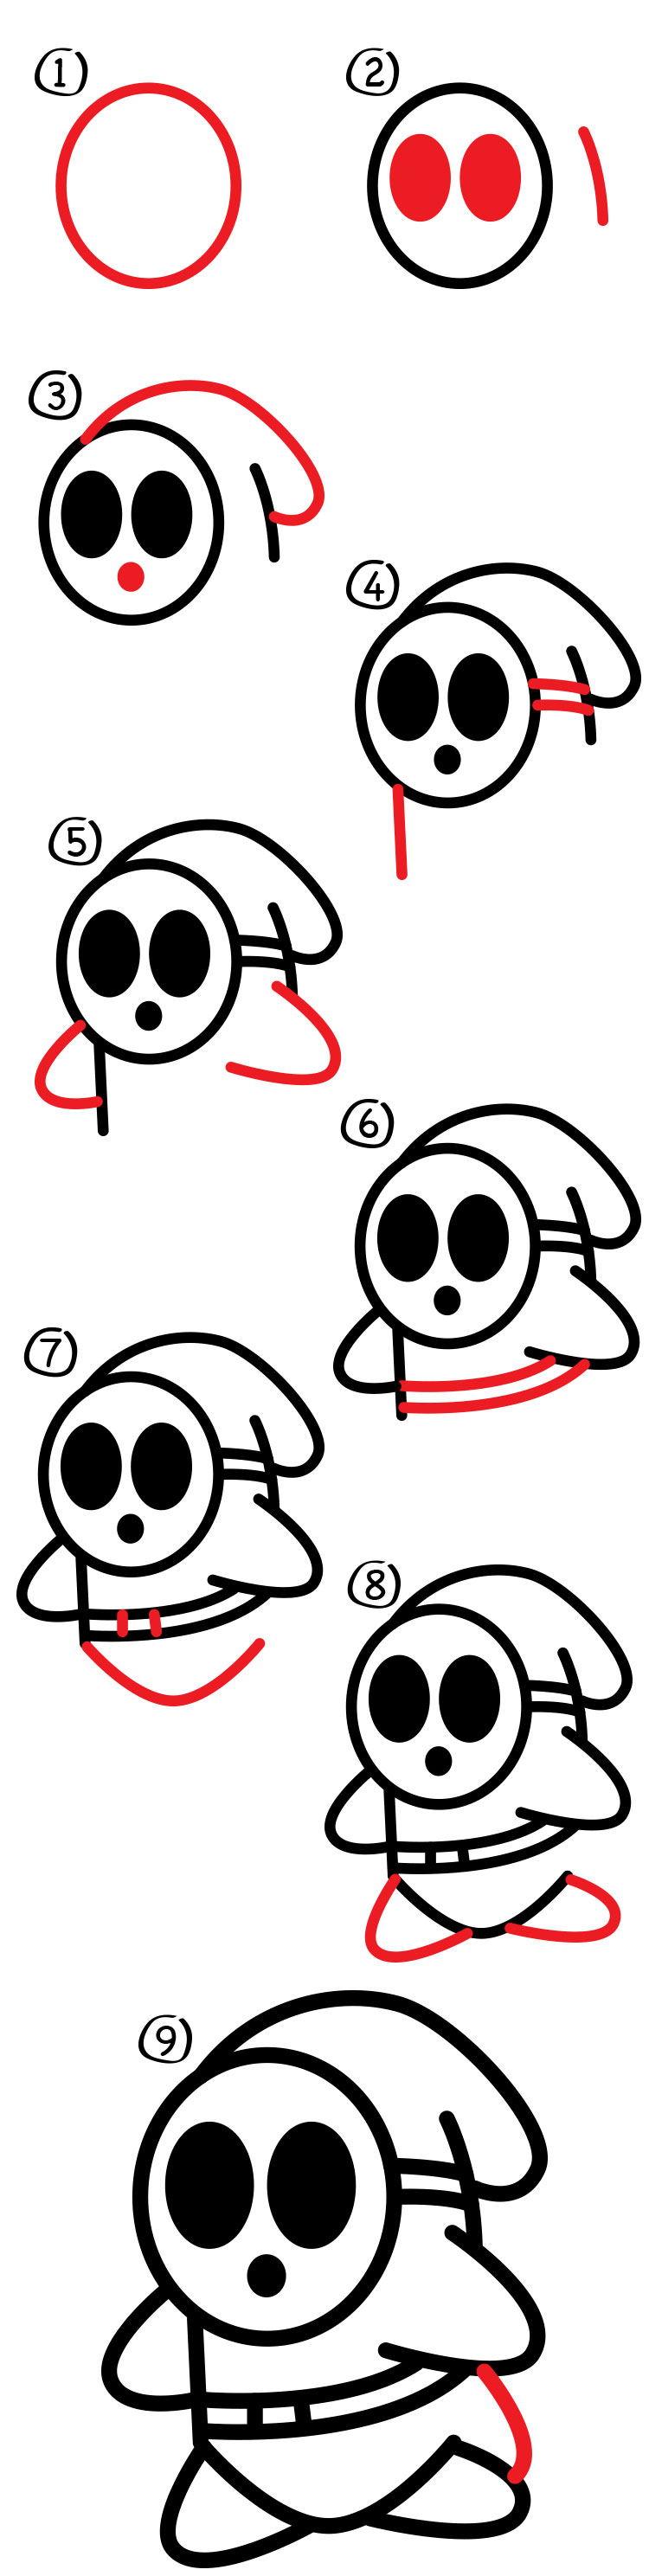 How To Draw Shy Guy From Mario - Art For Kids Hub